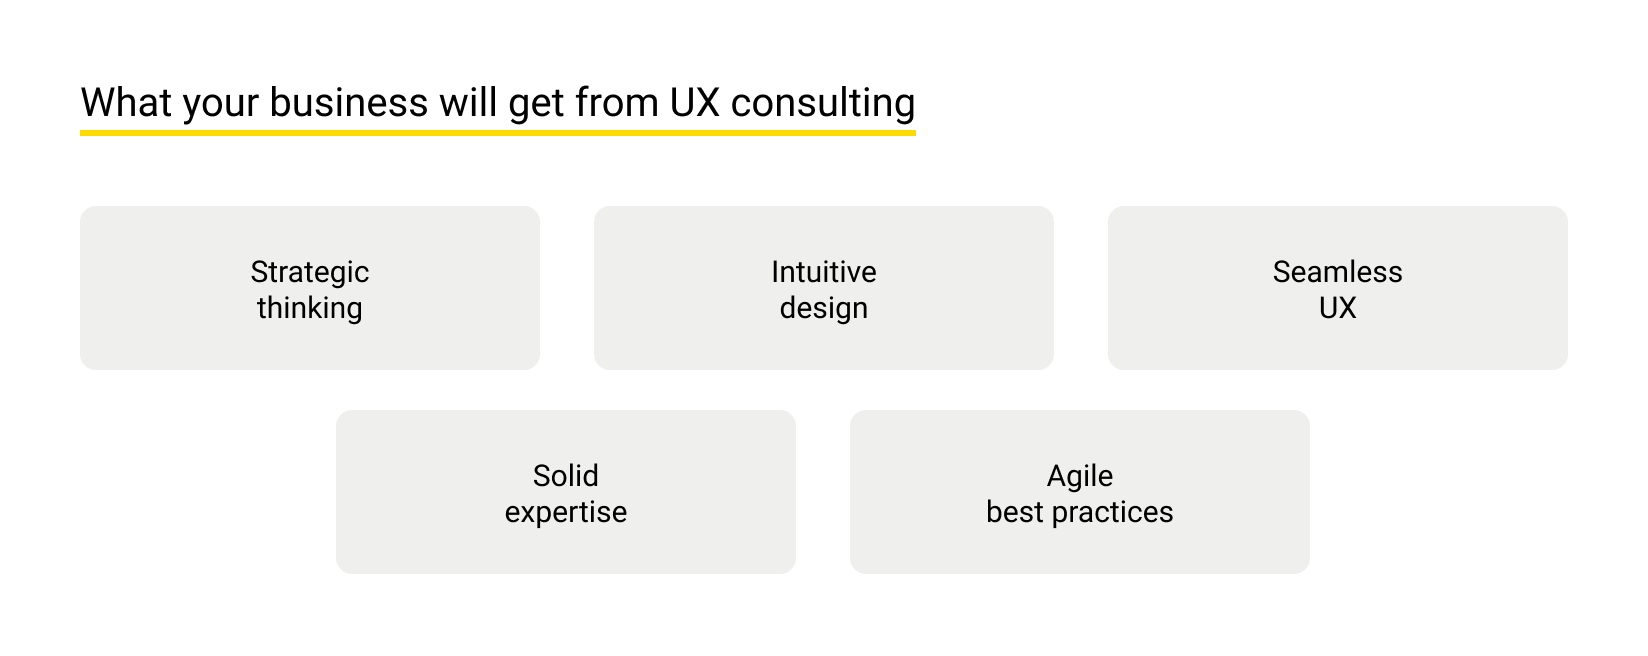 What your business will get from UX consulting